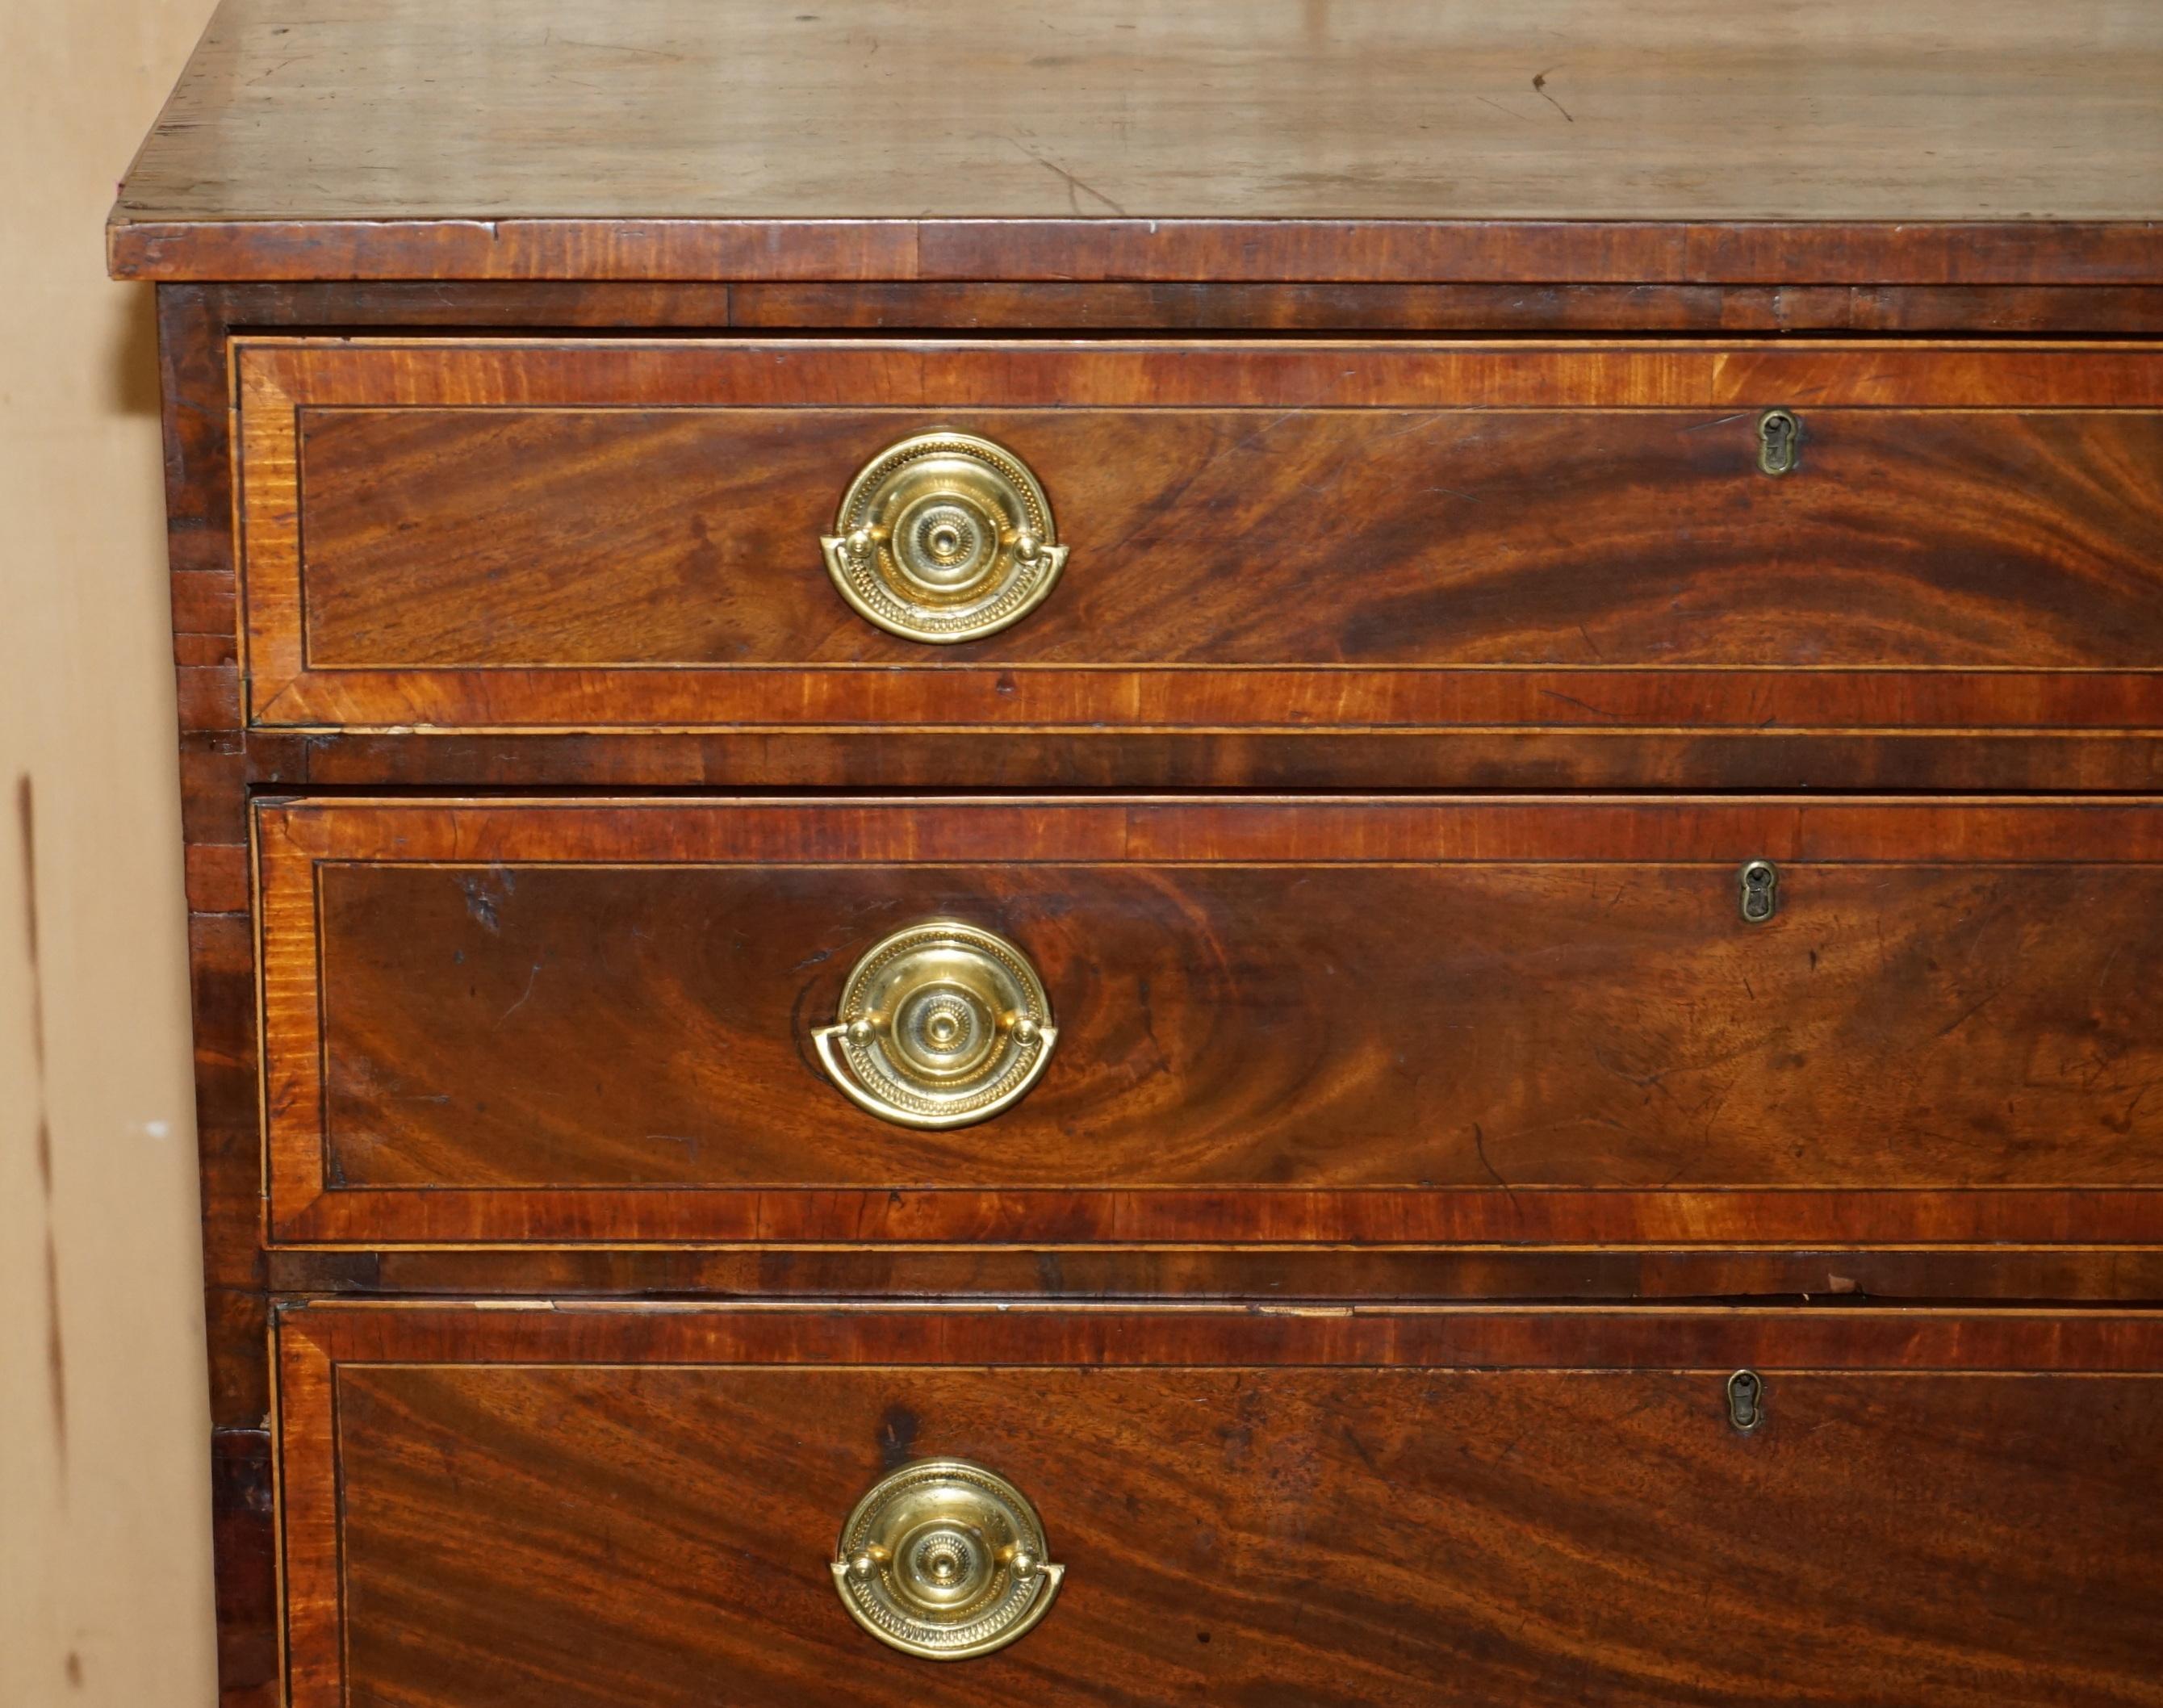 ANTiQUE GEORGE III BACHELORS CHEST OF DRAWERS ATTRIBUTED TO GILLOWS OF LANCASTER (Spätes 18. Jahrhundert) im Angebot